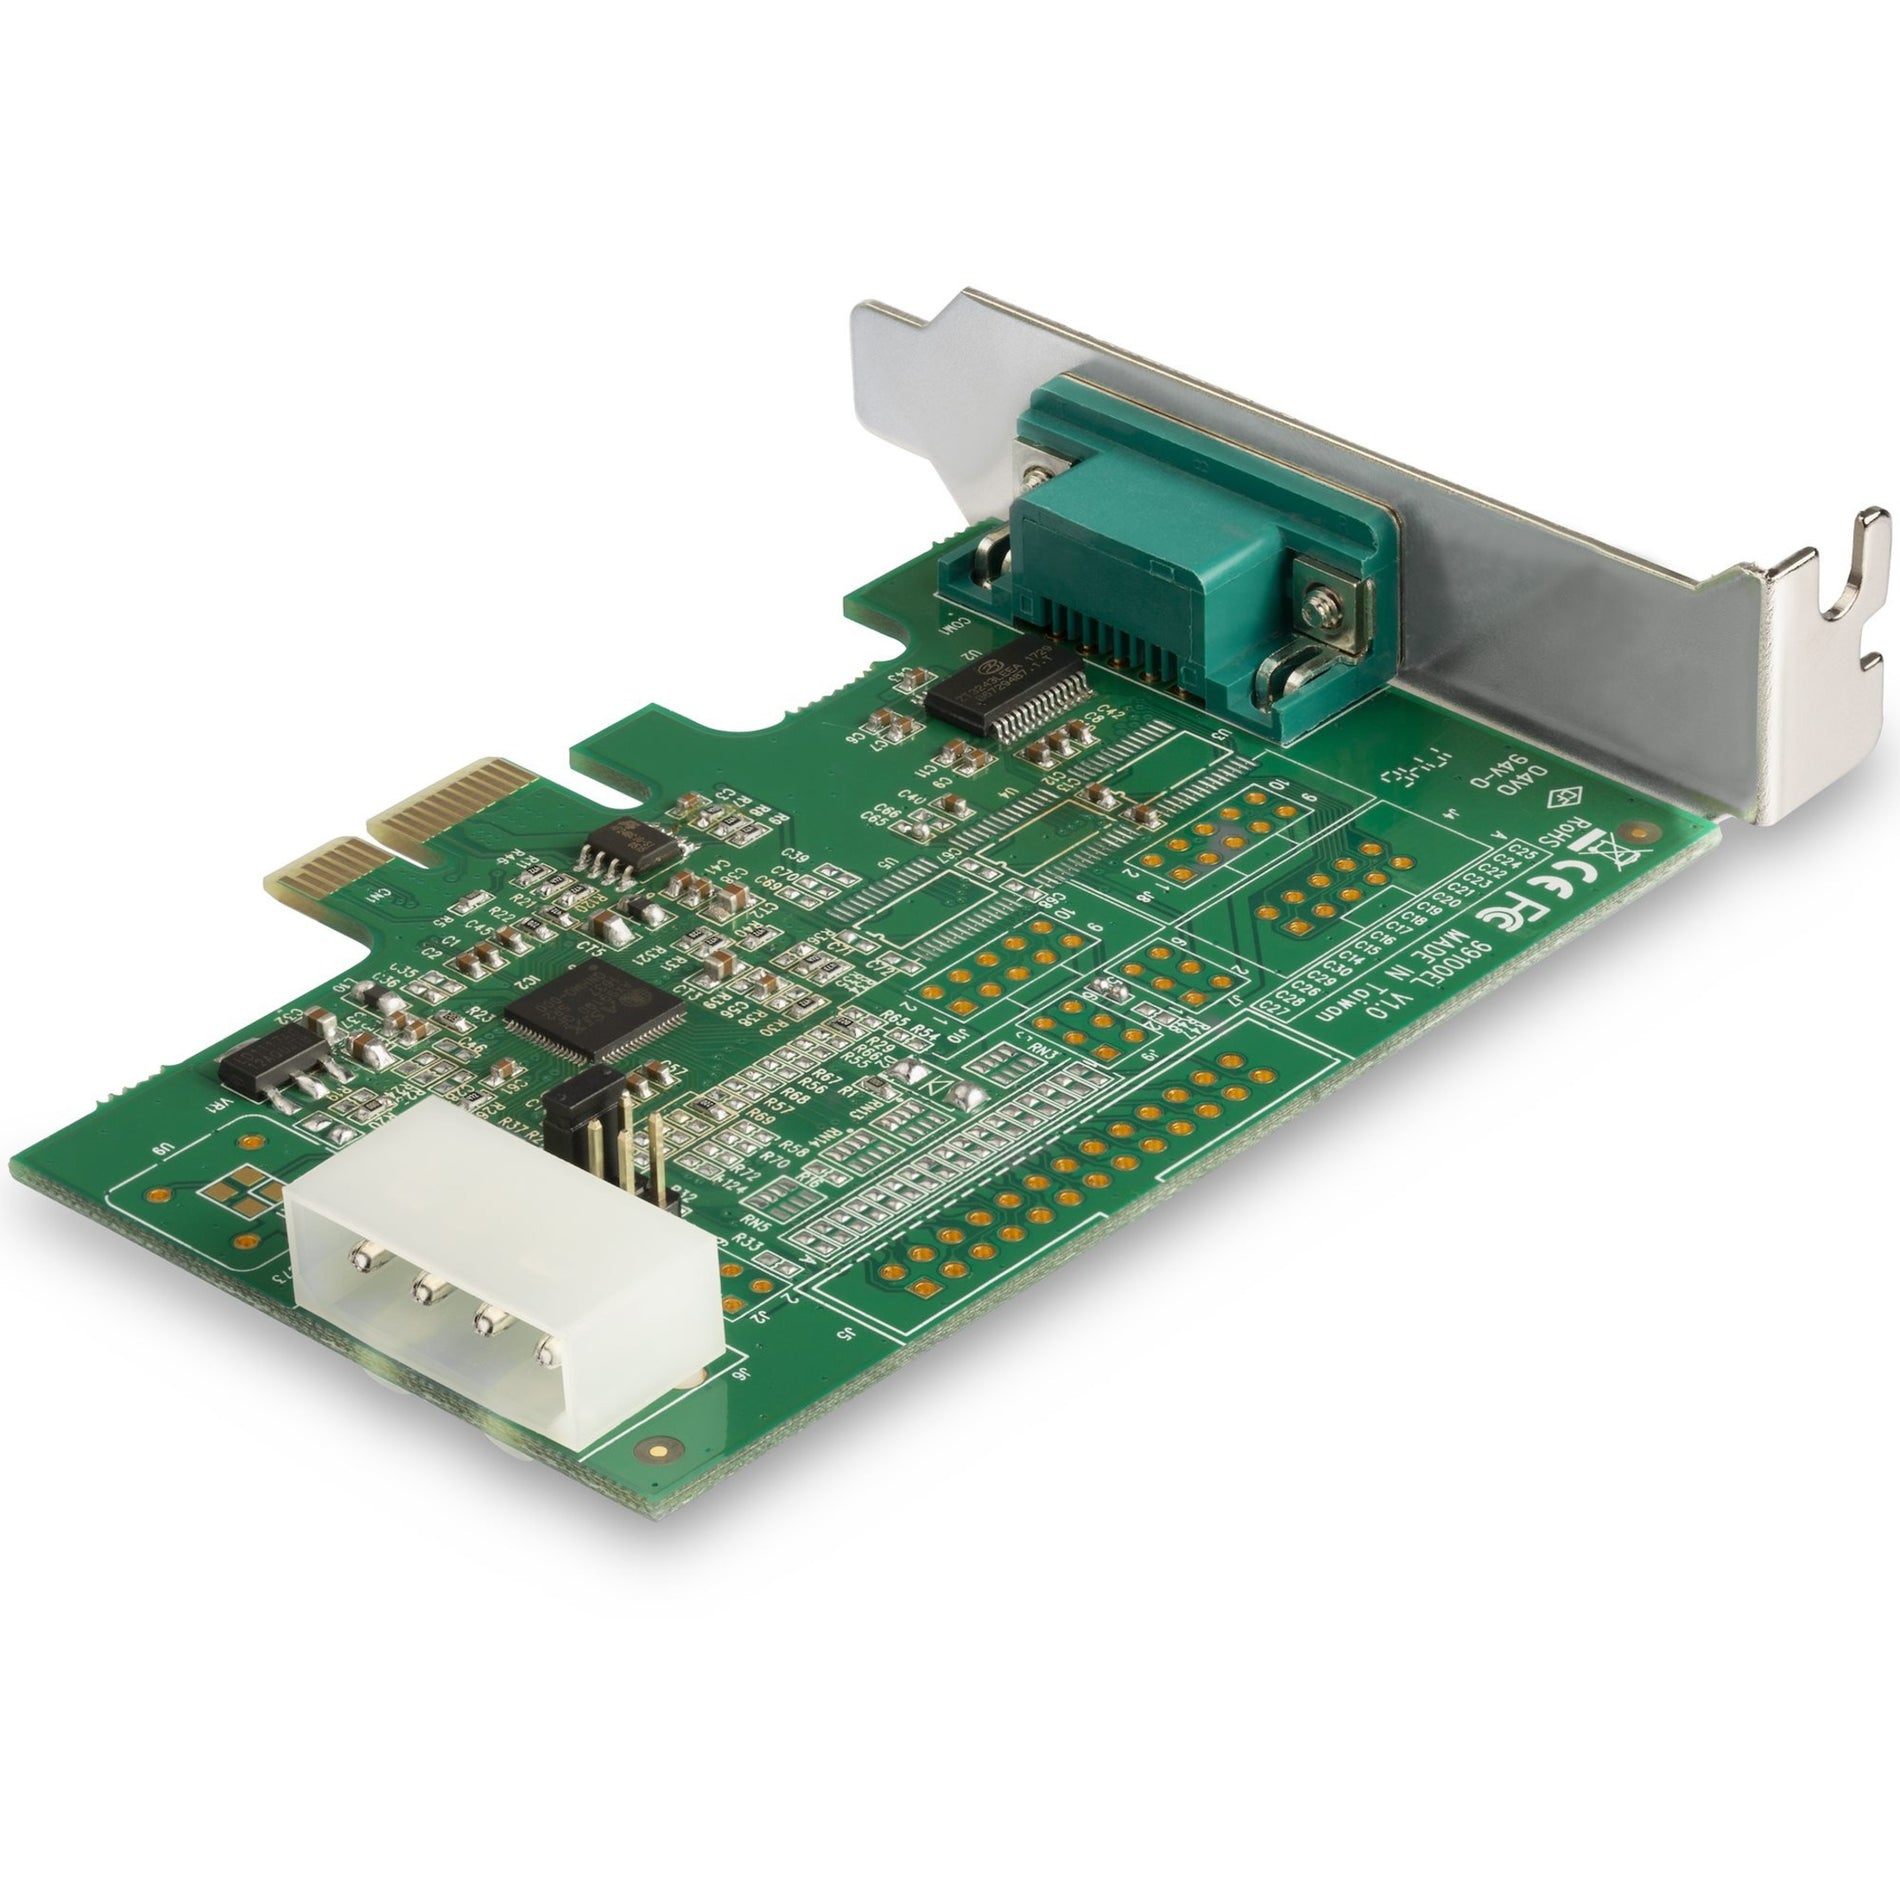 StarTech.com PEX1S953LP 1-Port PCI Express Serial Card with 16950 UART - Low-Profile, Serial/Parallel Adapter